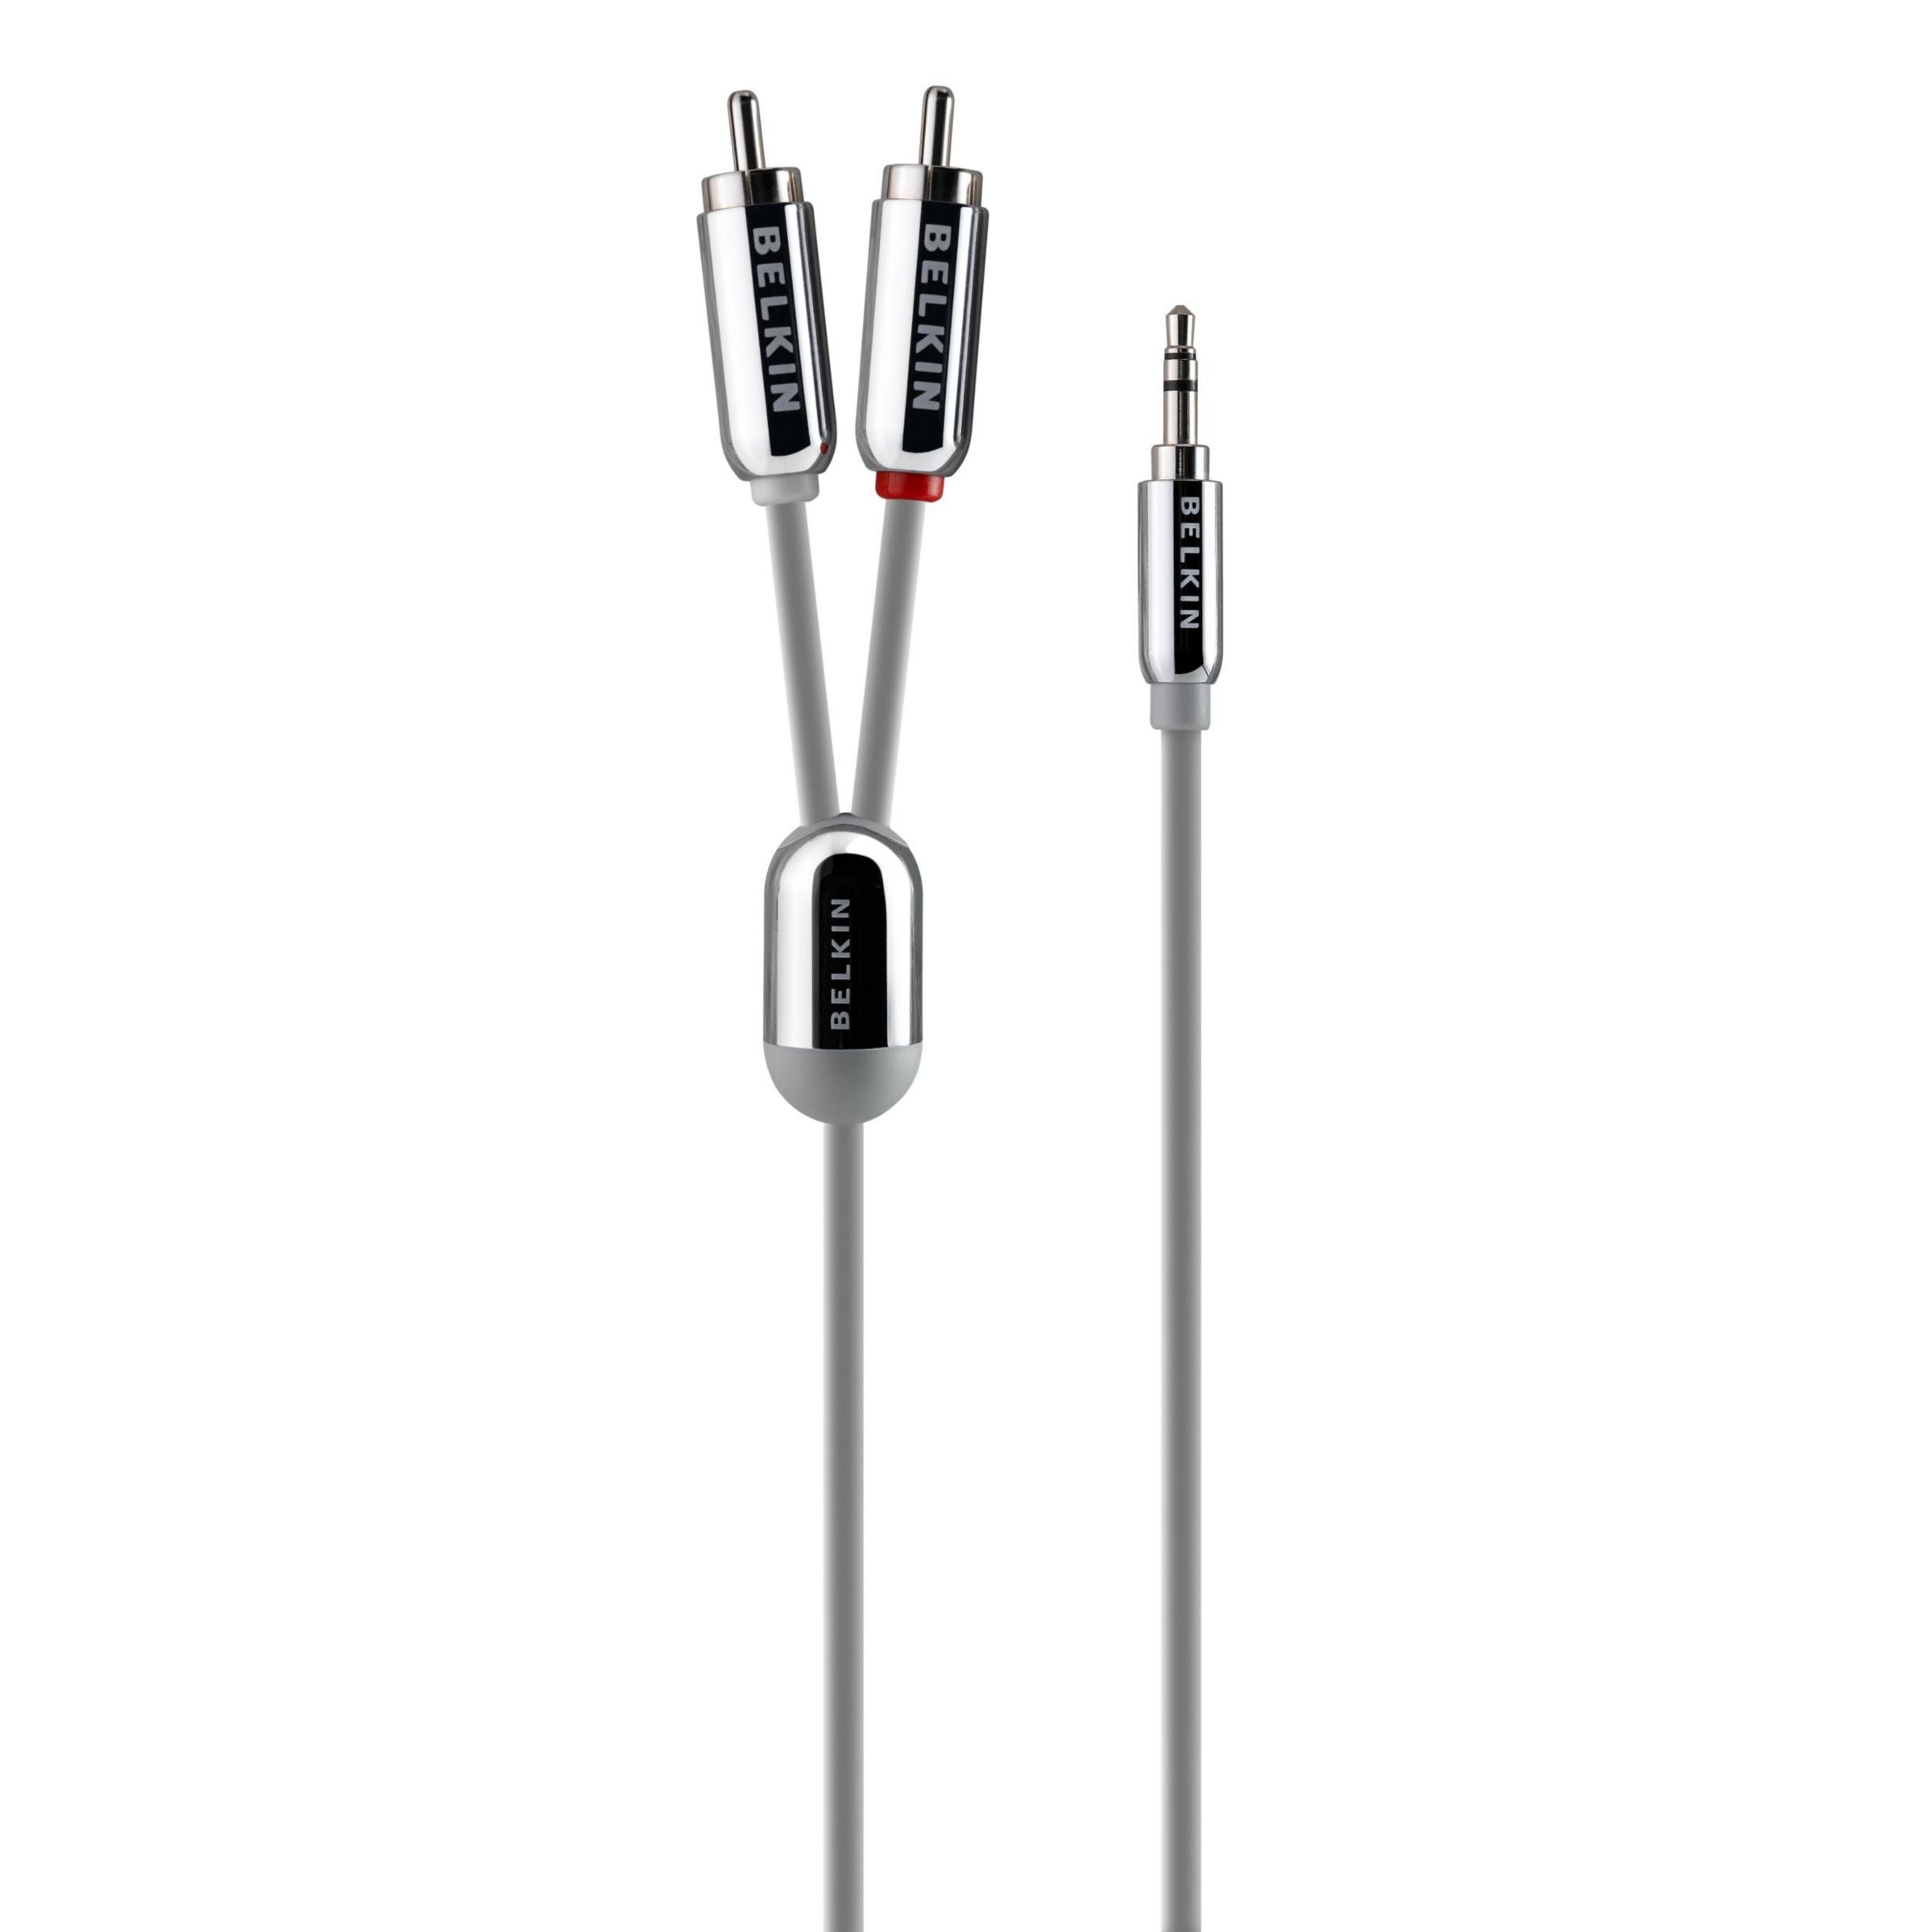 Belkin 3.5mm to 2-RCA cable